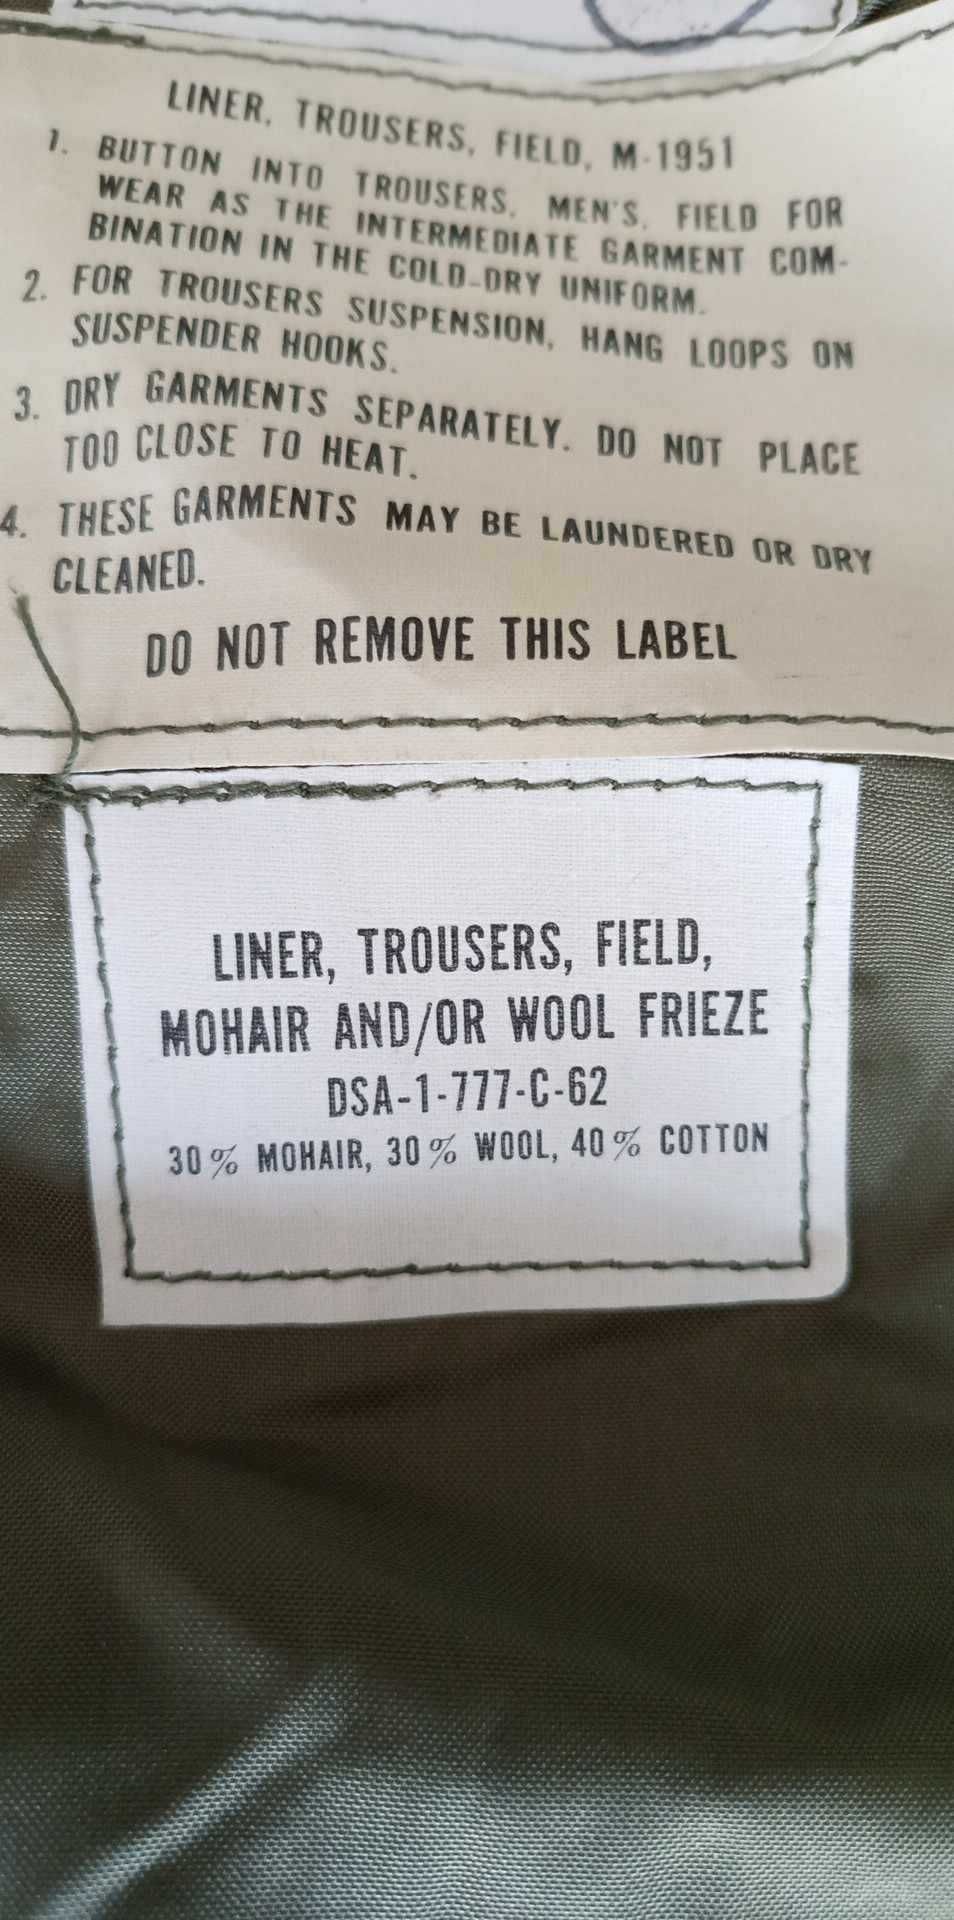 M51 Liner Trousers Field Large Regular US.Army